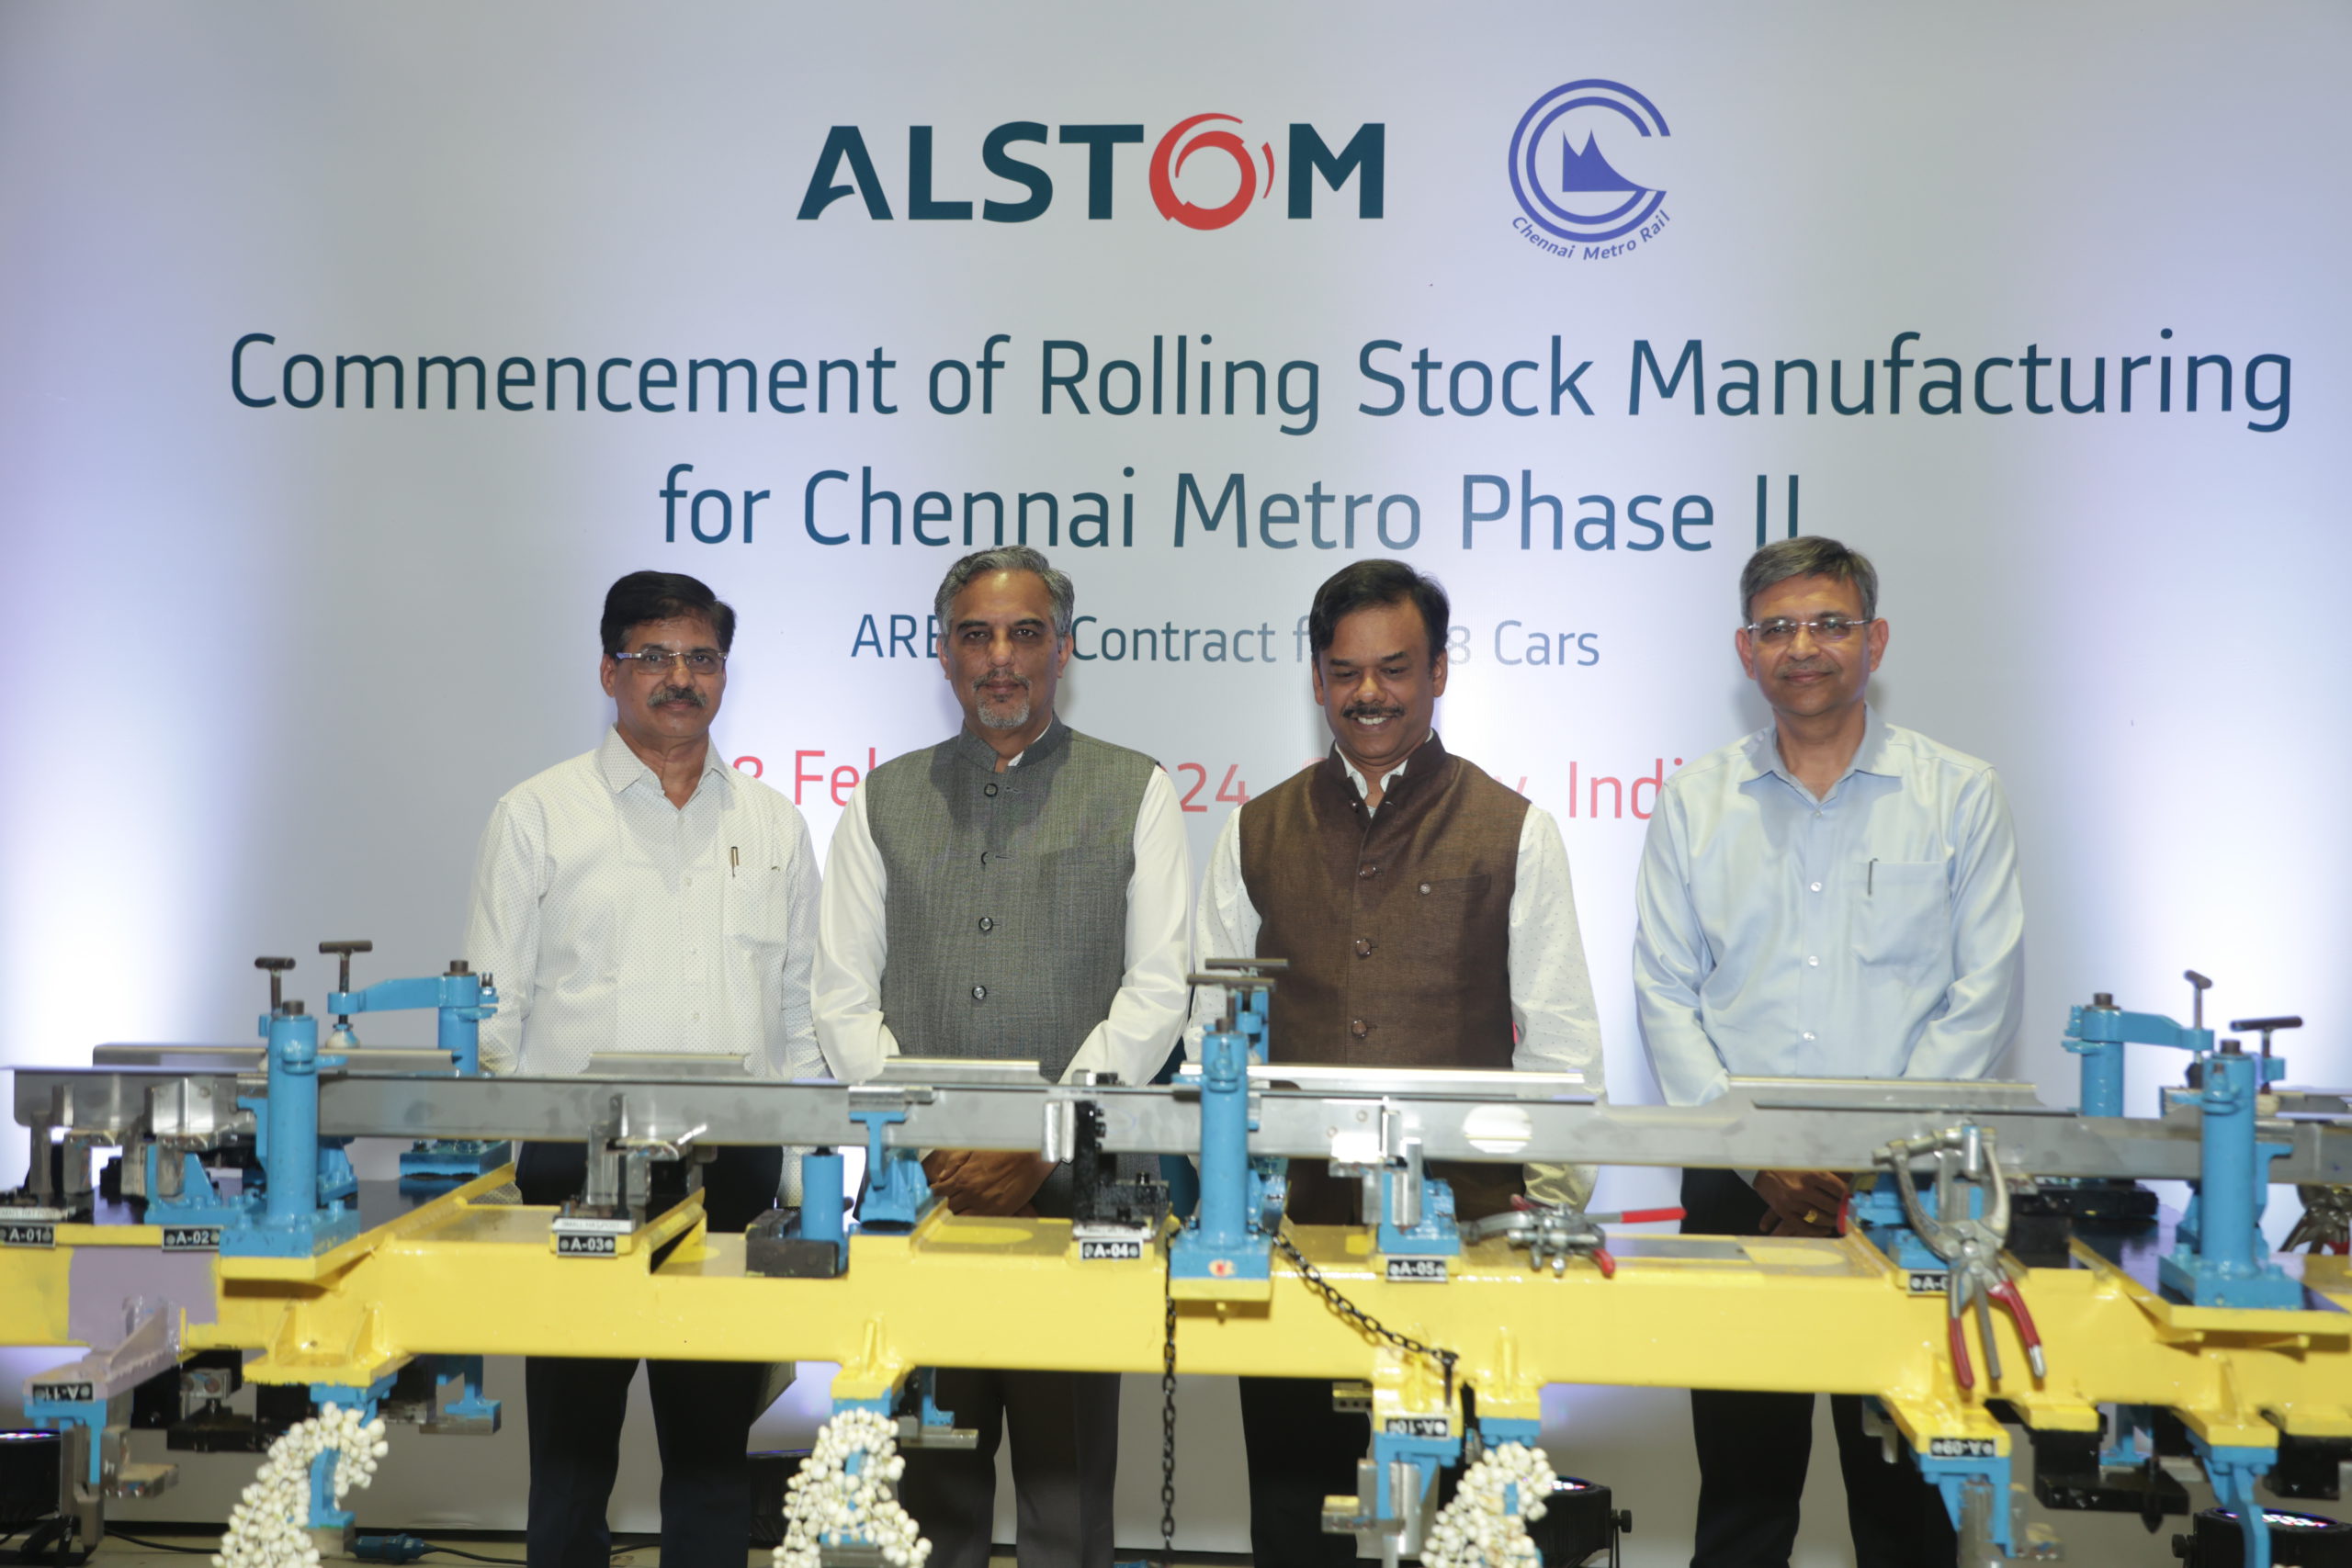 Alstom Commences Production Of Driverless Trainsets For Chennai Metro Phase II